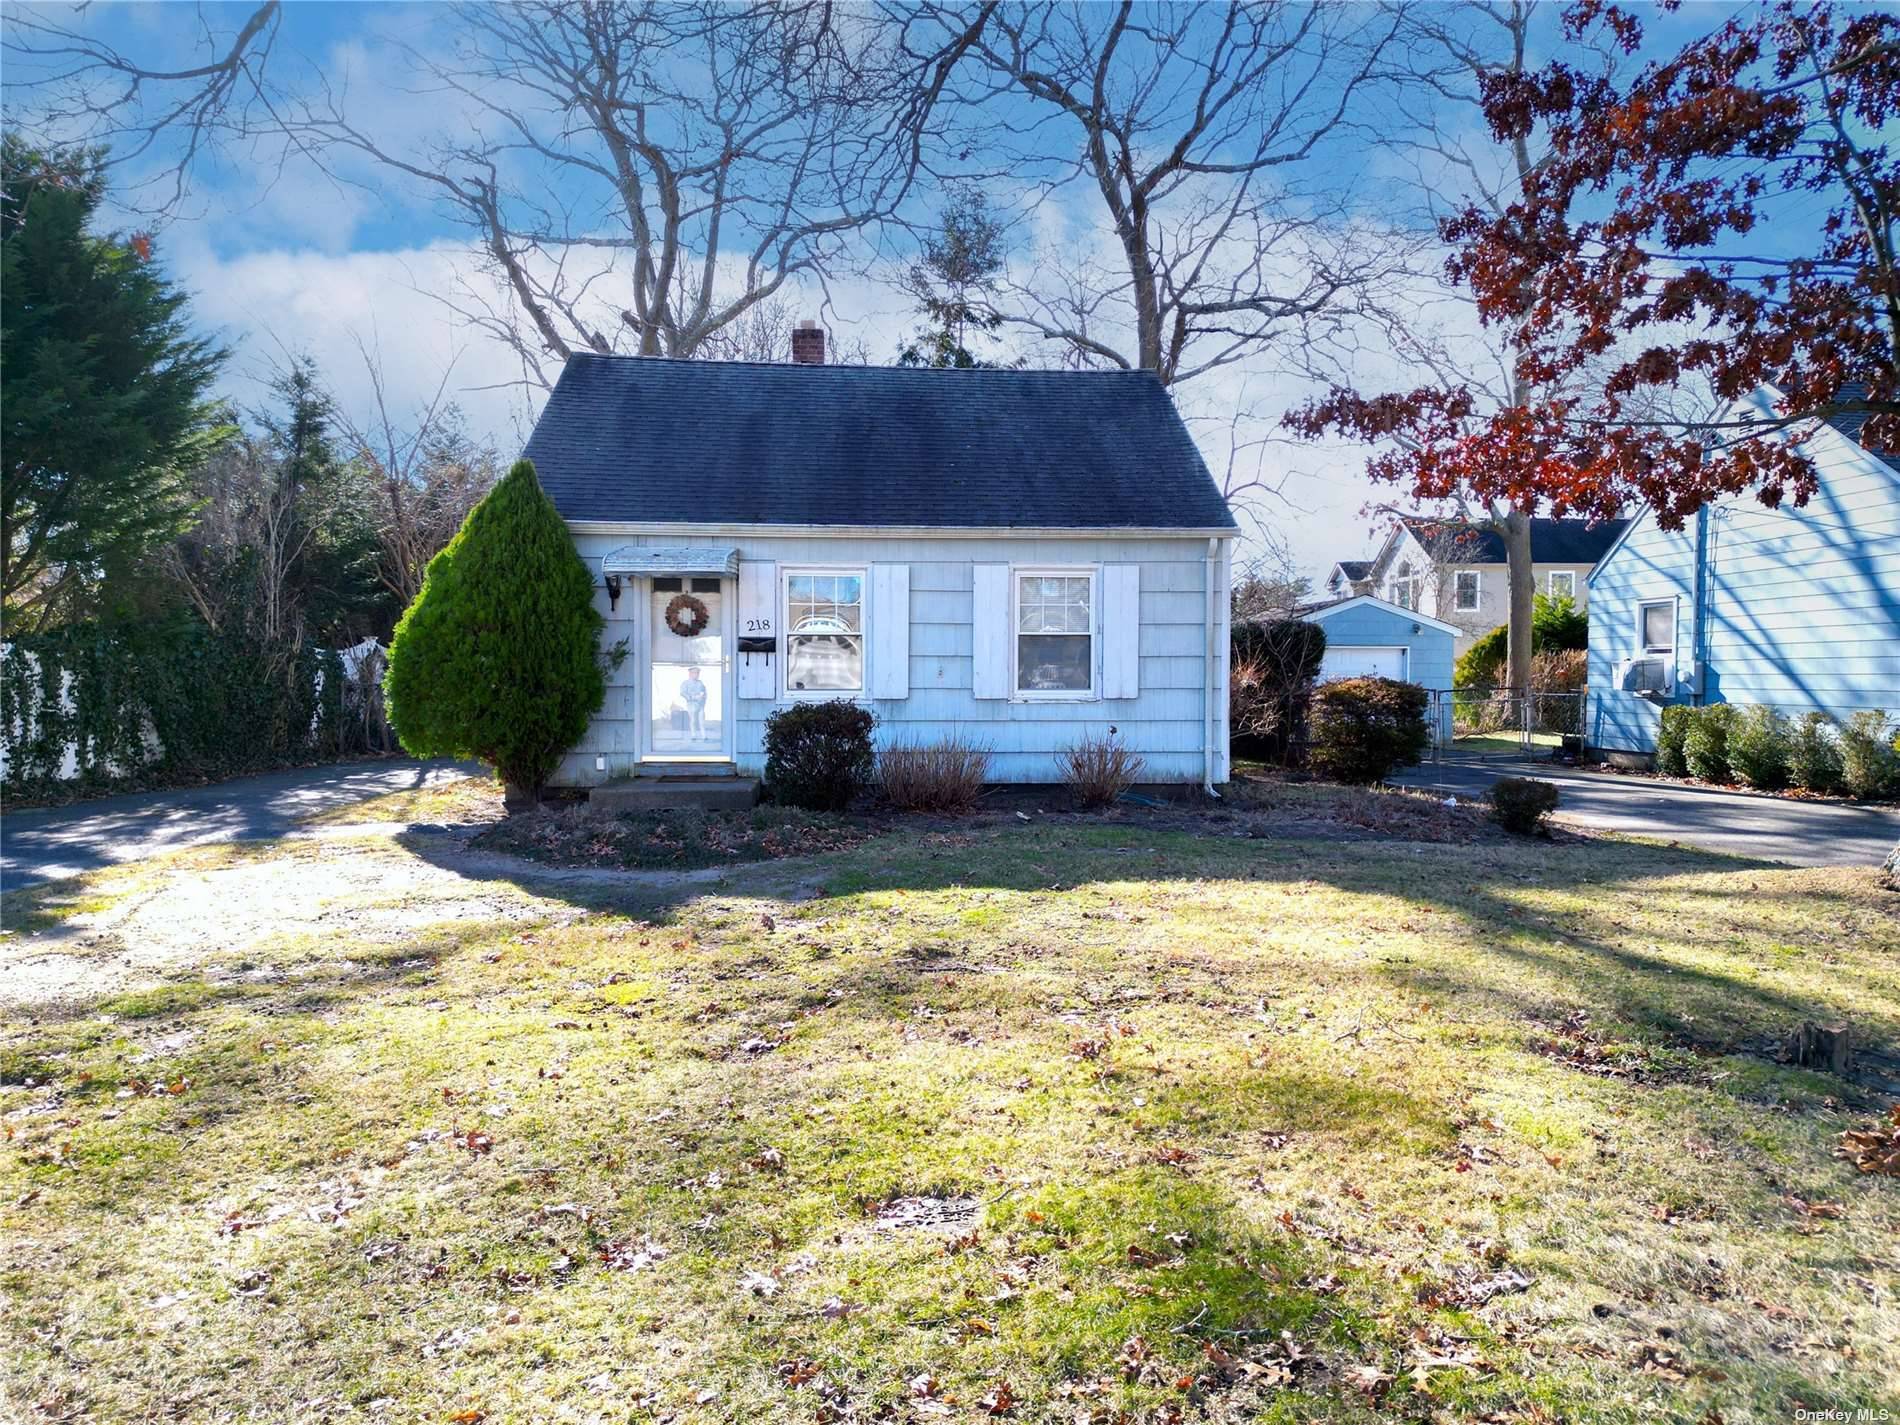 Welcome to this charming 2 bedroom, 1 bathroom cottage nestled in the heart of Sayville.